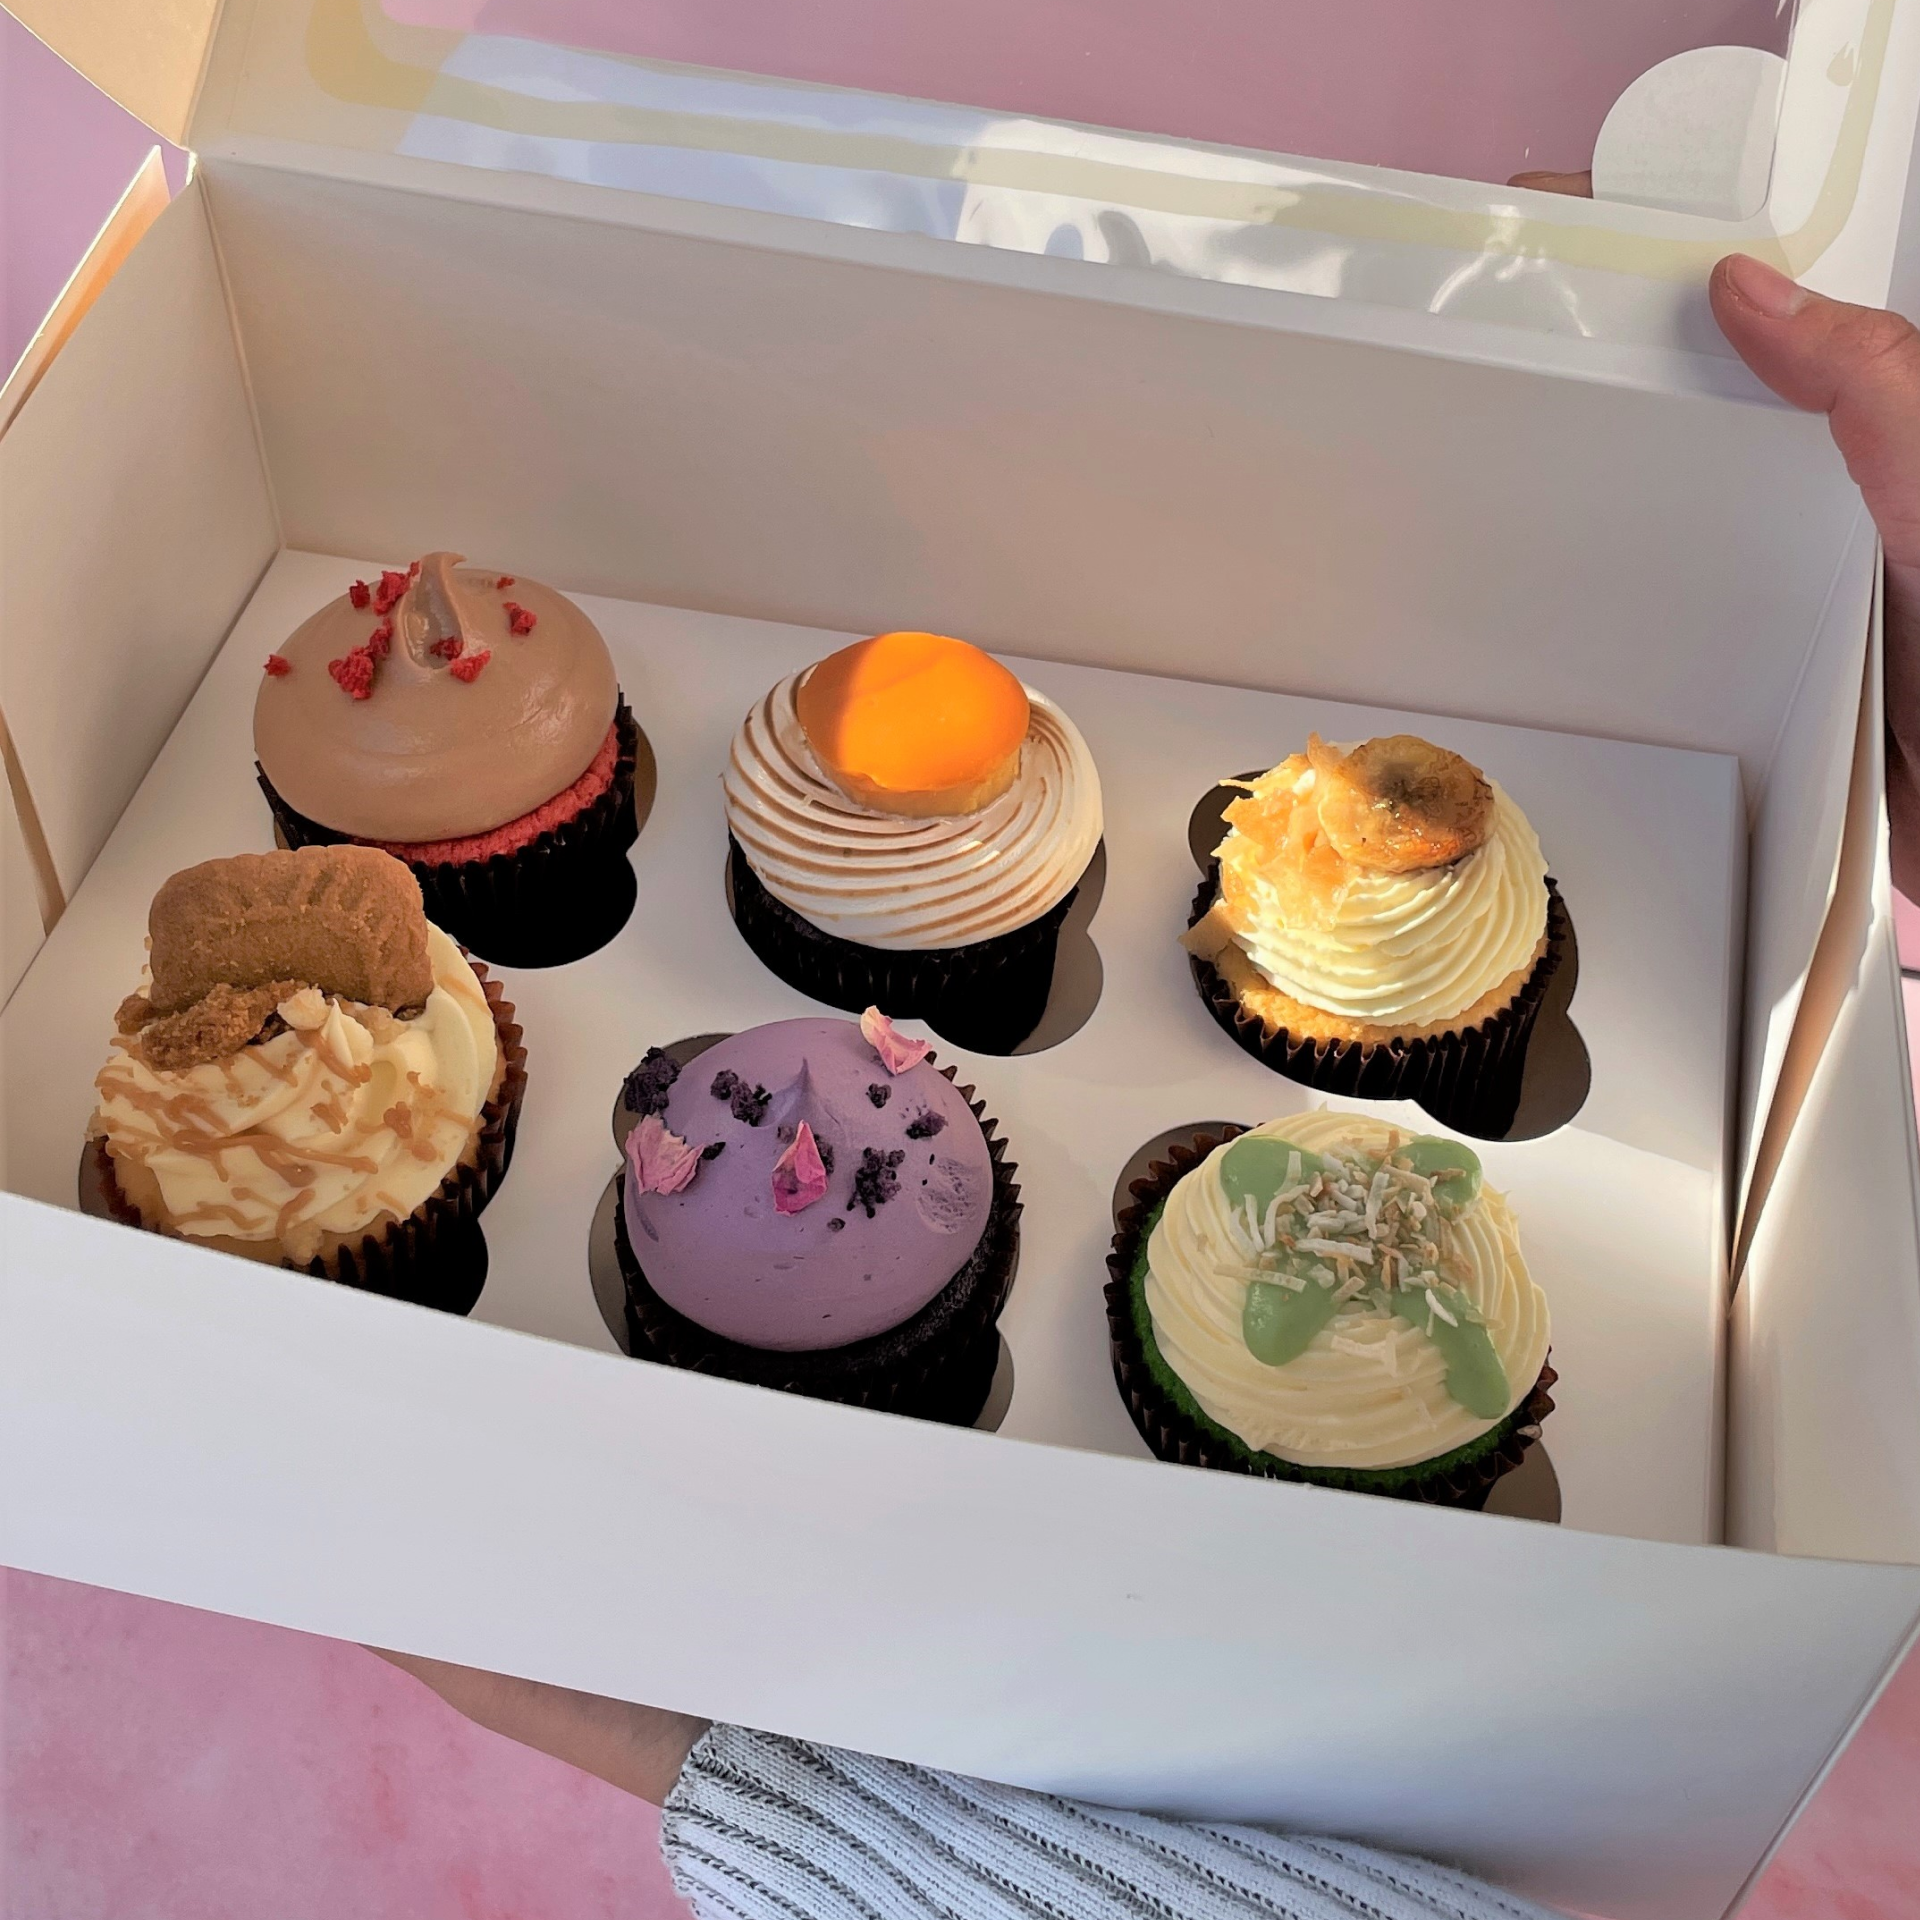 Buy China Wholesale Cupcake Box Transparent Cake Paper Boxes Cake Gift Boxes  With Handle Cake Paper Boxes With Windows & Cake Box $0.11 |  Globalsources.com